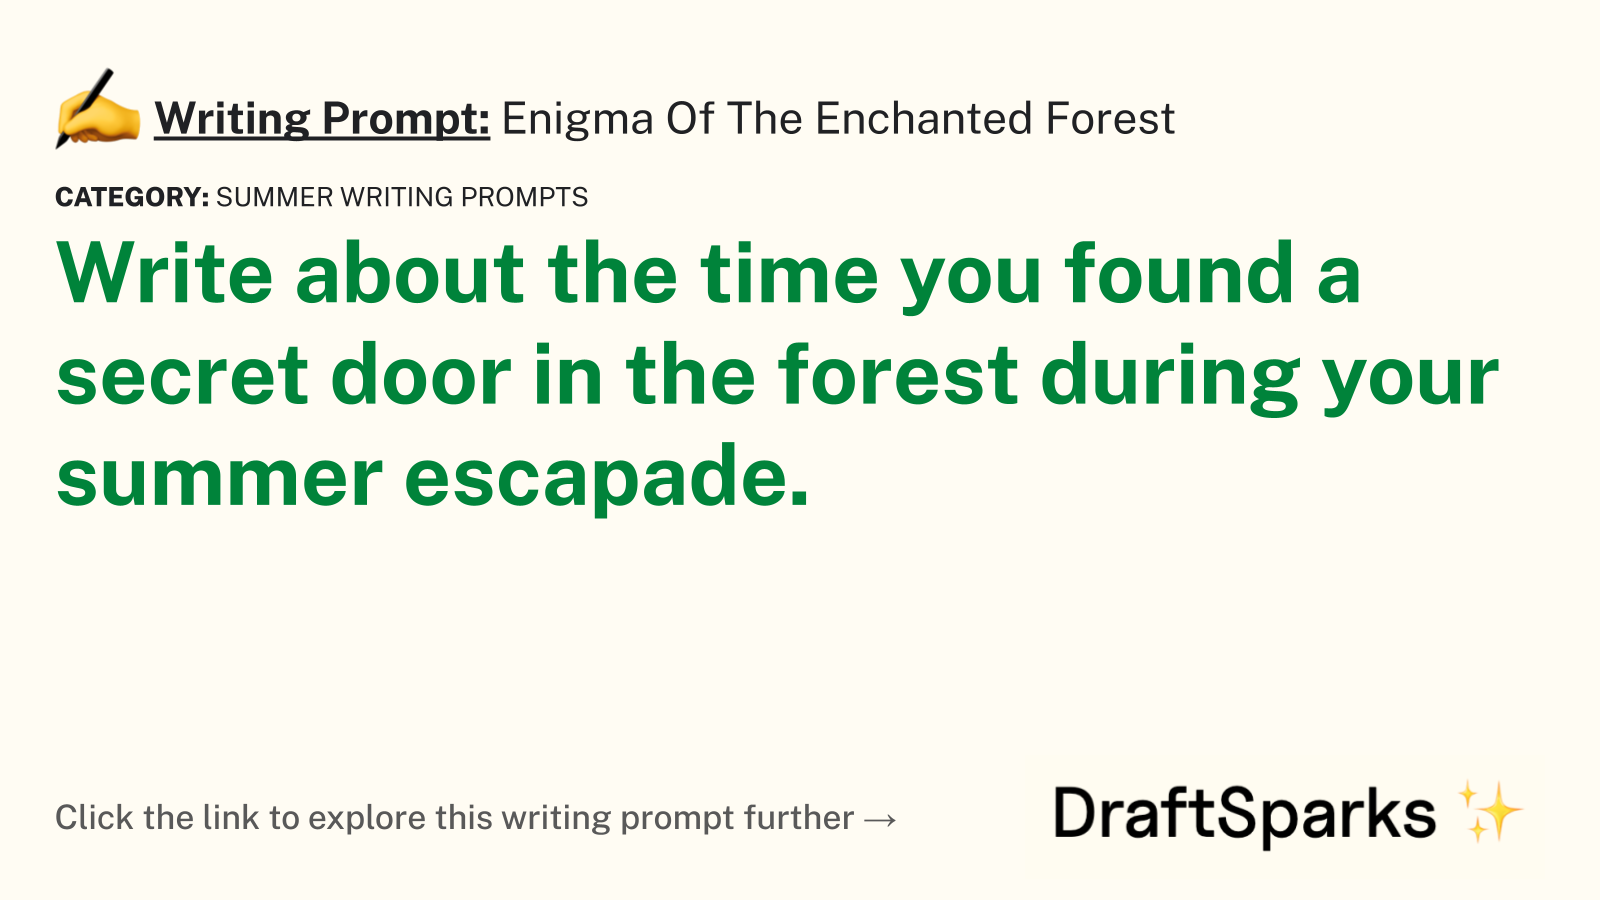 Enigma Of The Enchanted Forest